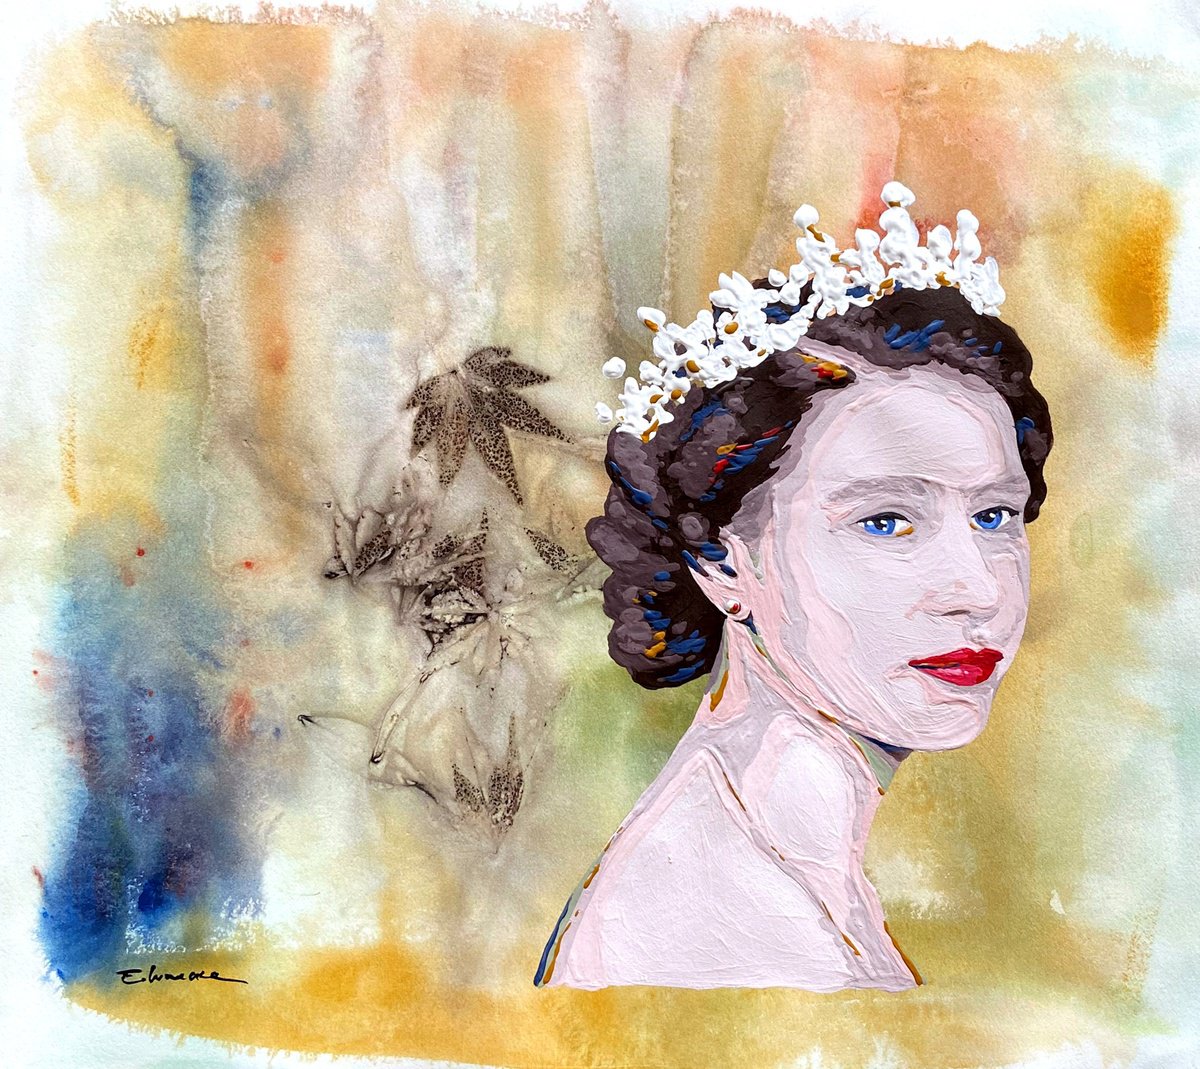 Queen surrounded by nature by Eileen Lunecke